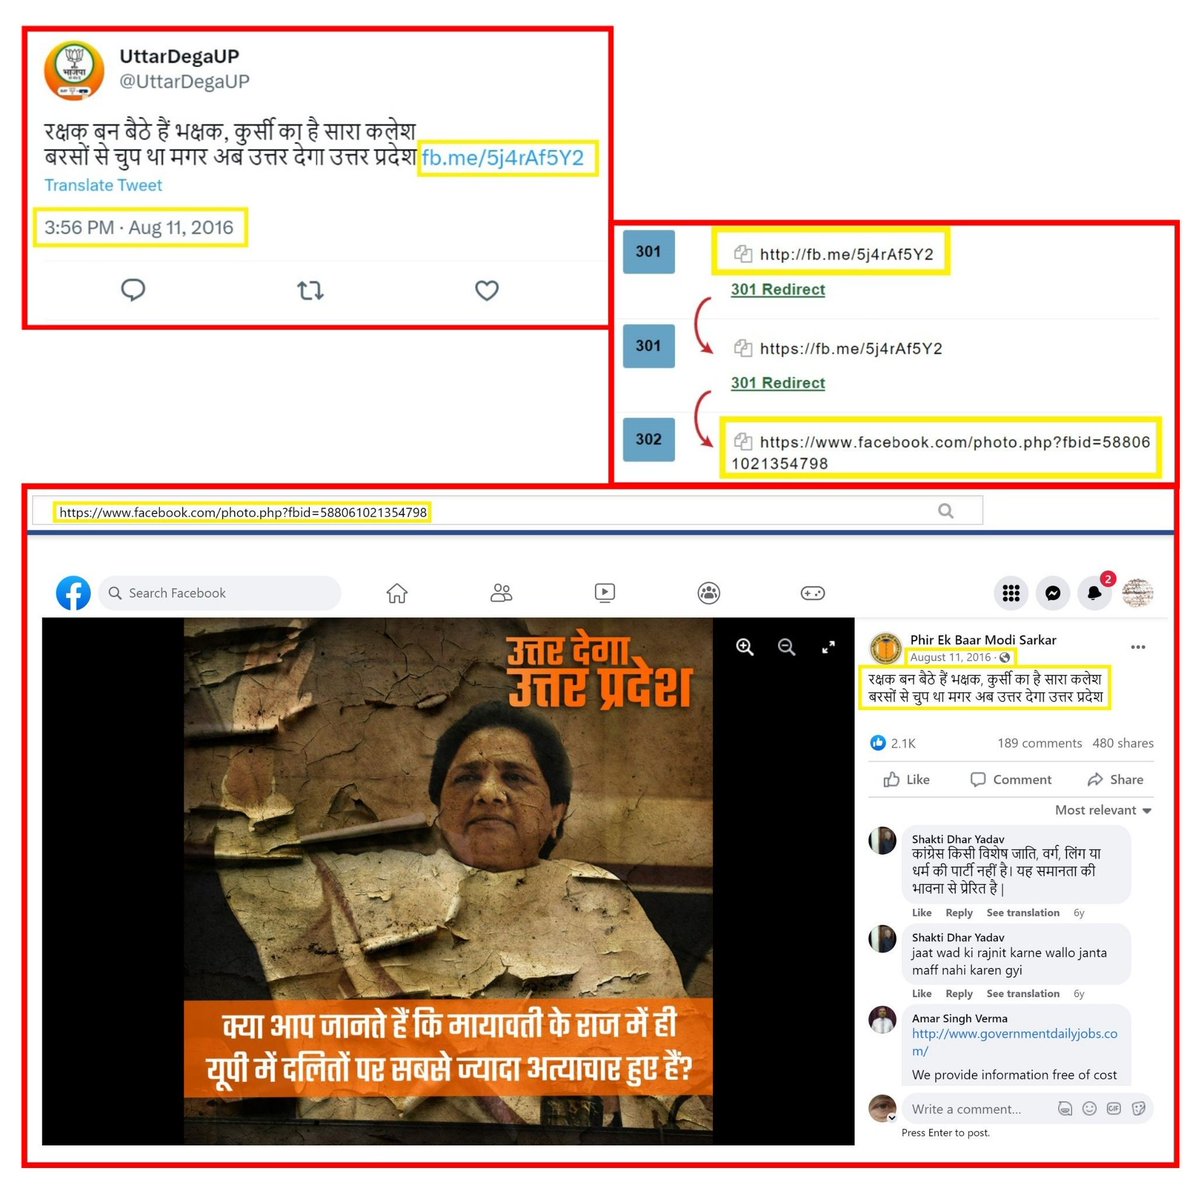 Here are some more examples in which these facebook pages are pushing BJP's propaganda and demeaning non-BJP party and leaders in the advertisement run by them on Facebook